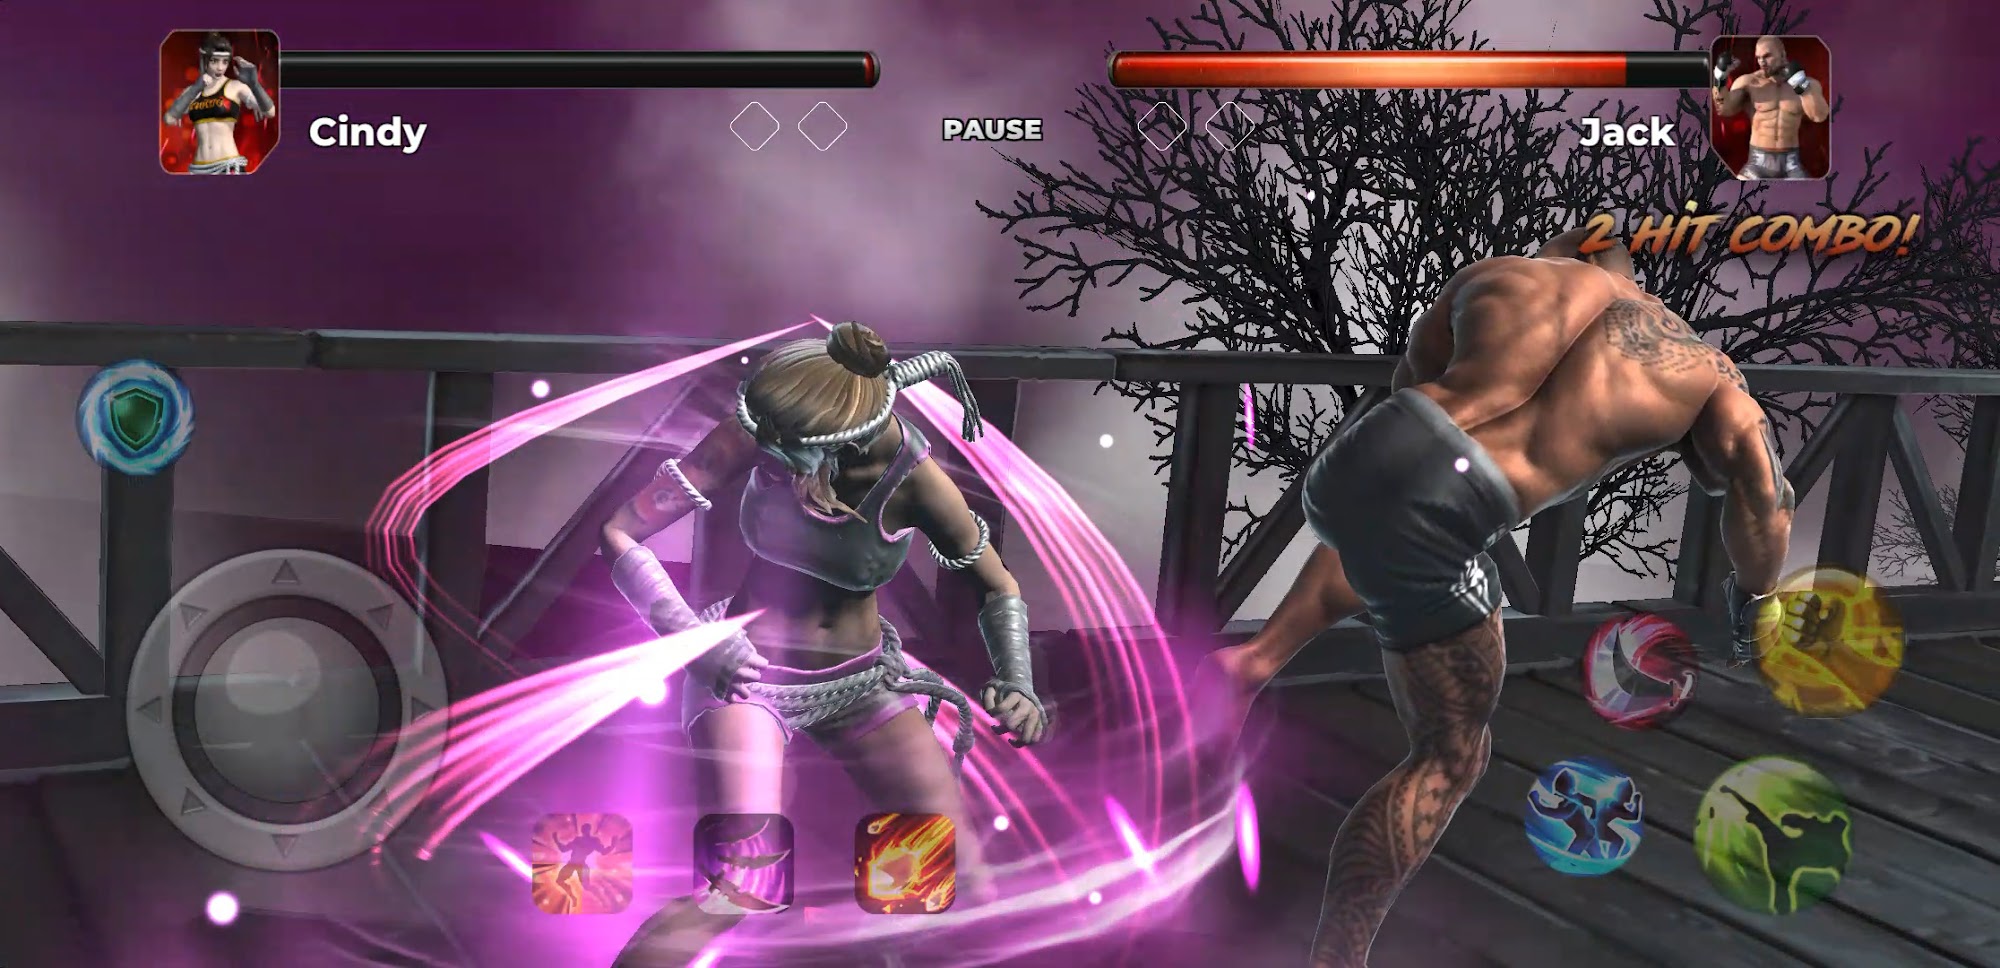 Scarica Modern Fighting: Fighting Game gratis per Android.